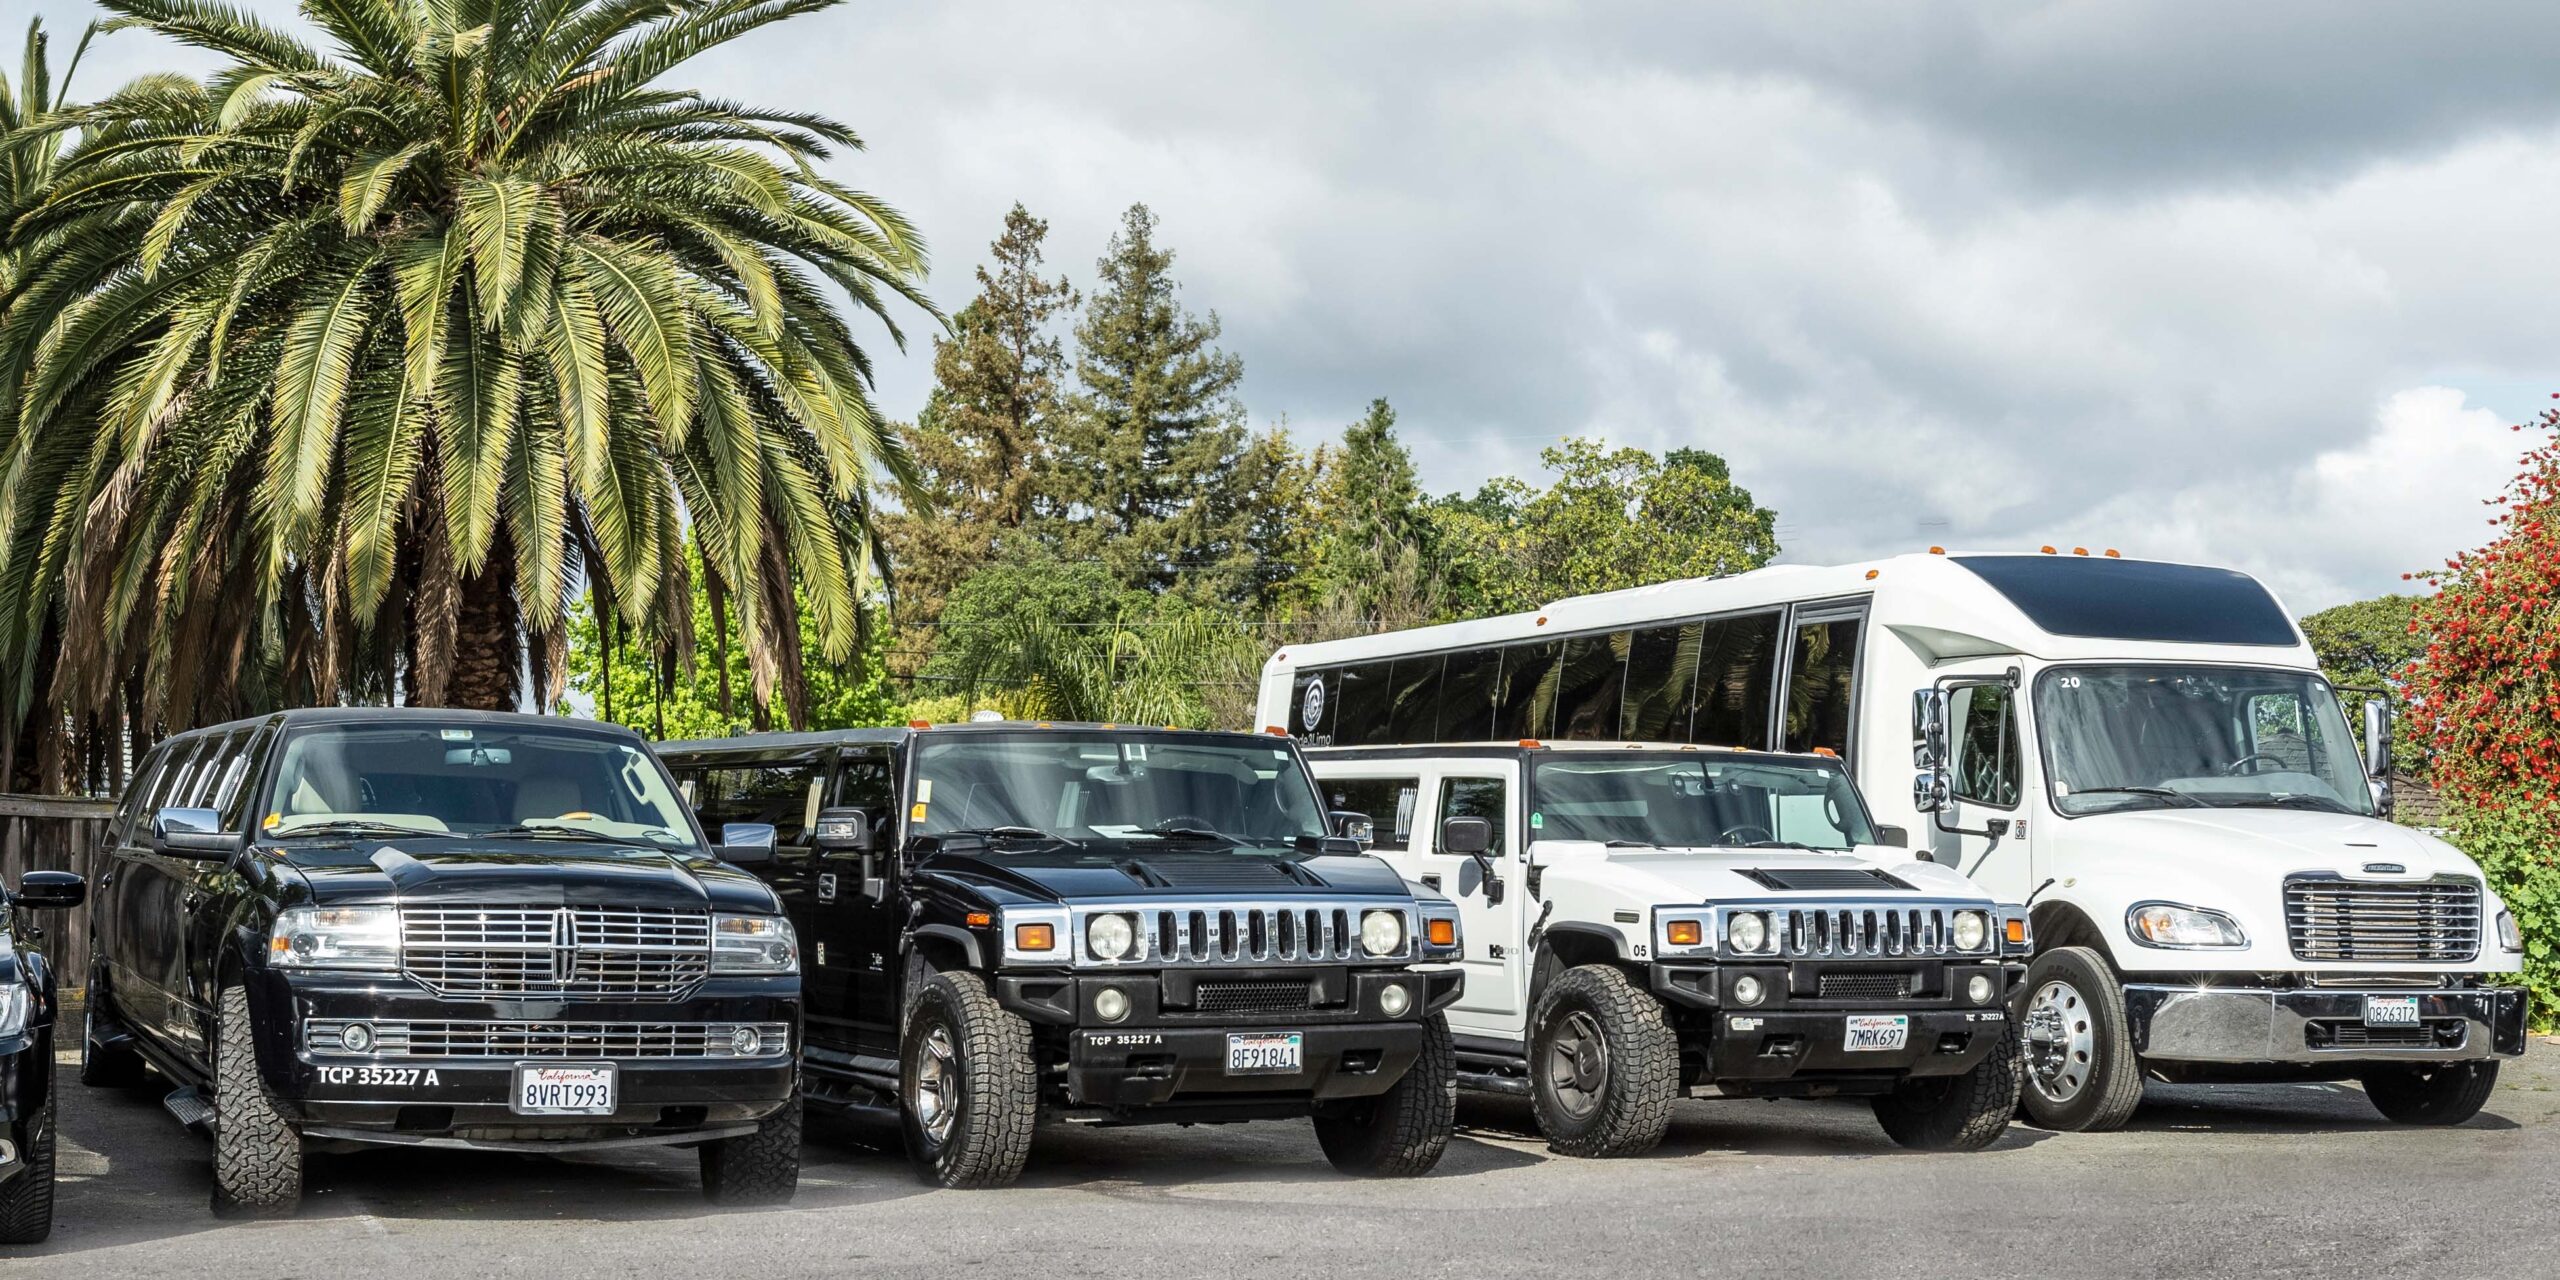 Contact Us - Code 3 Transportation - Photo: luxury vehicles parked in a row.